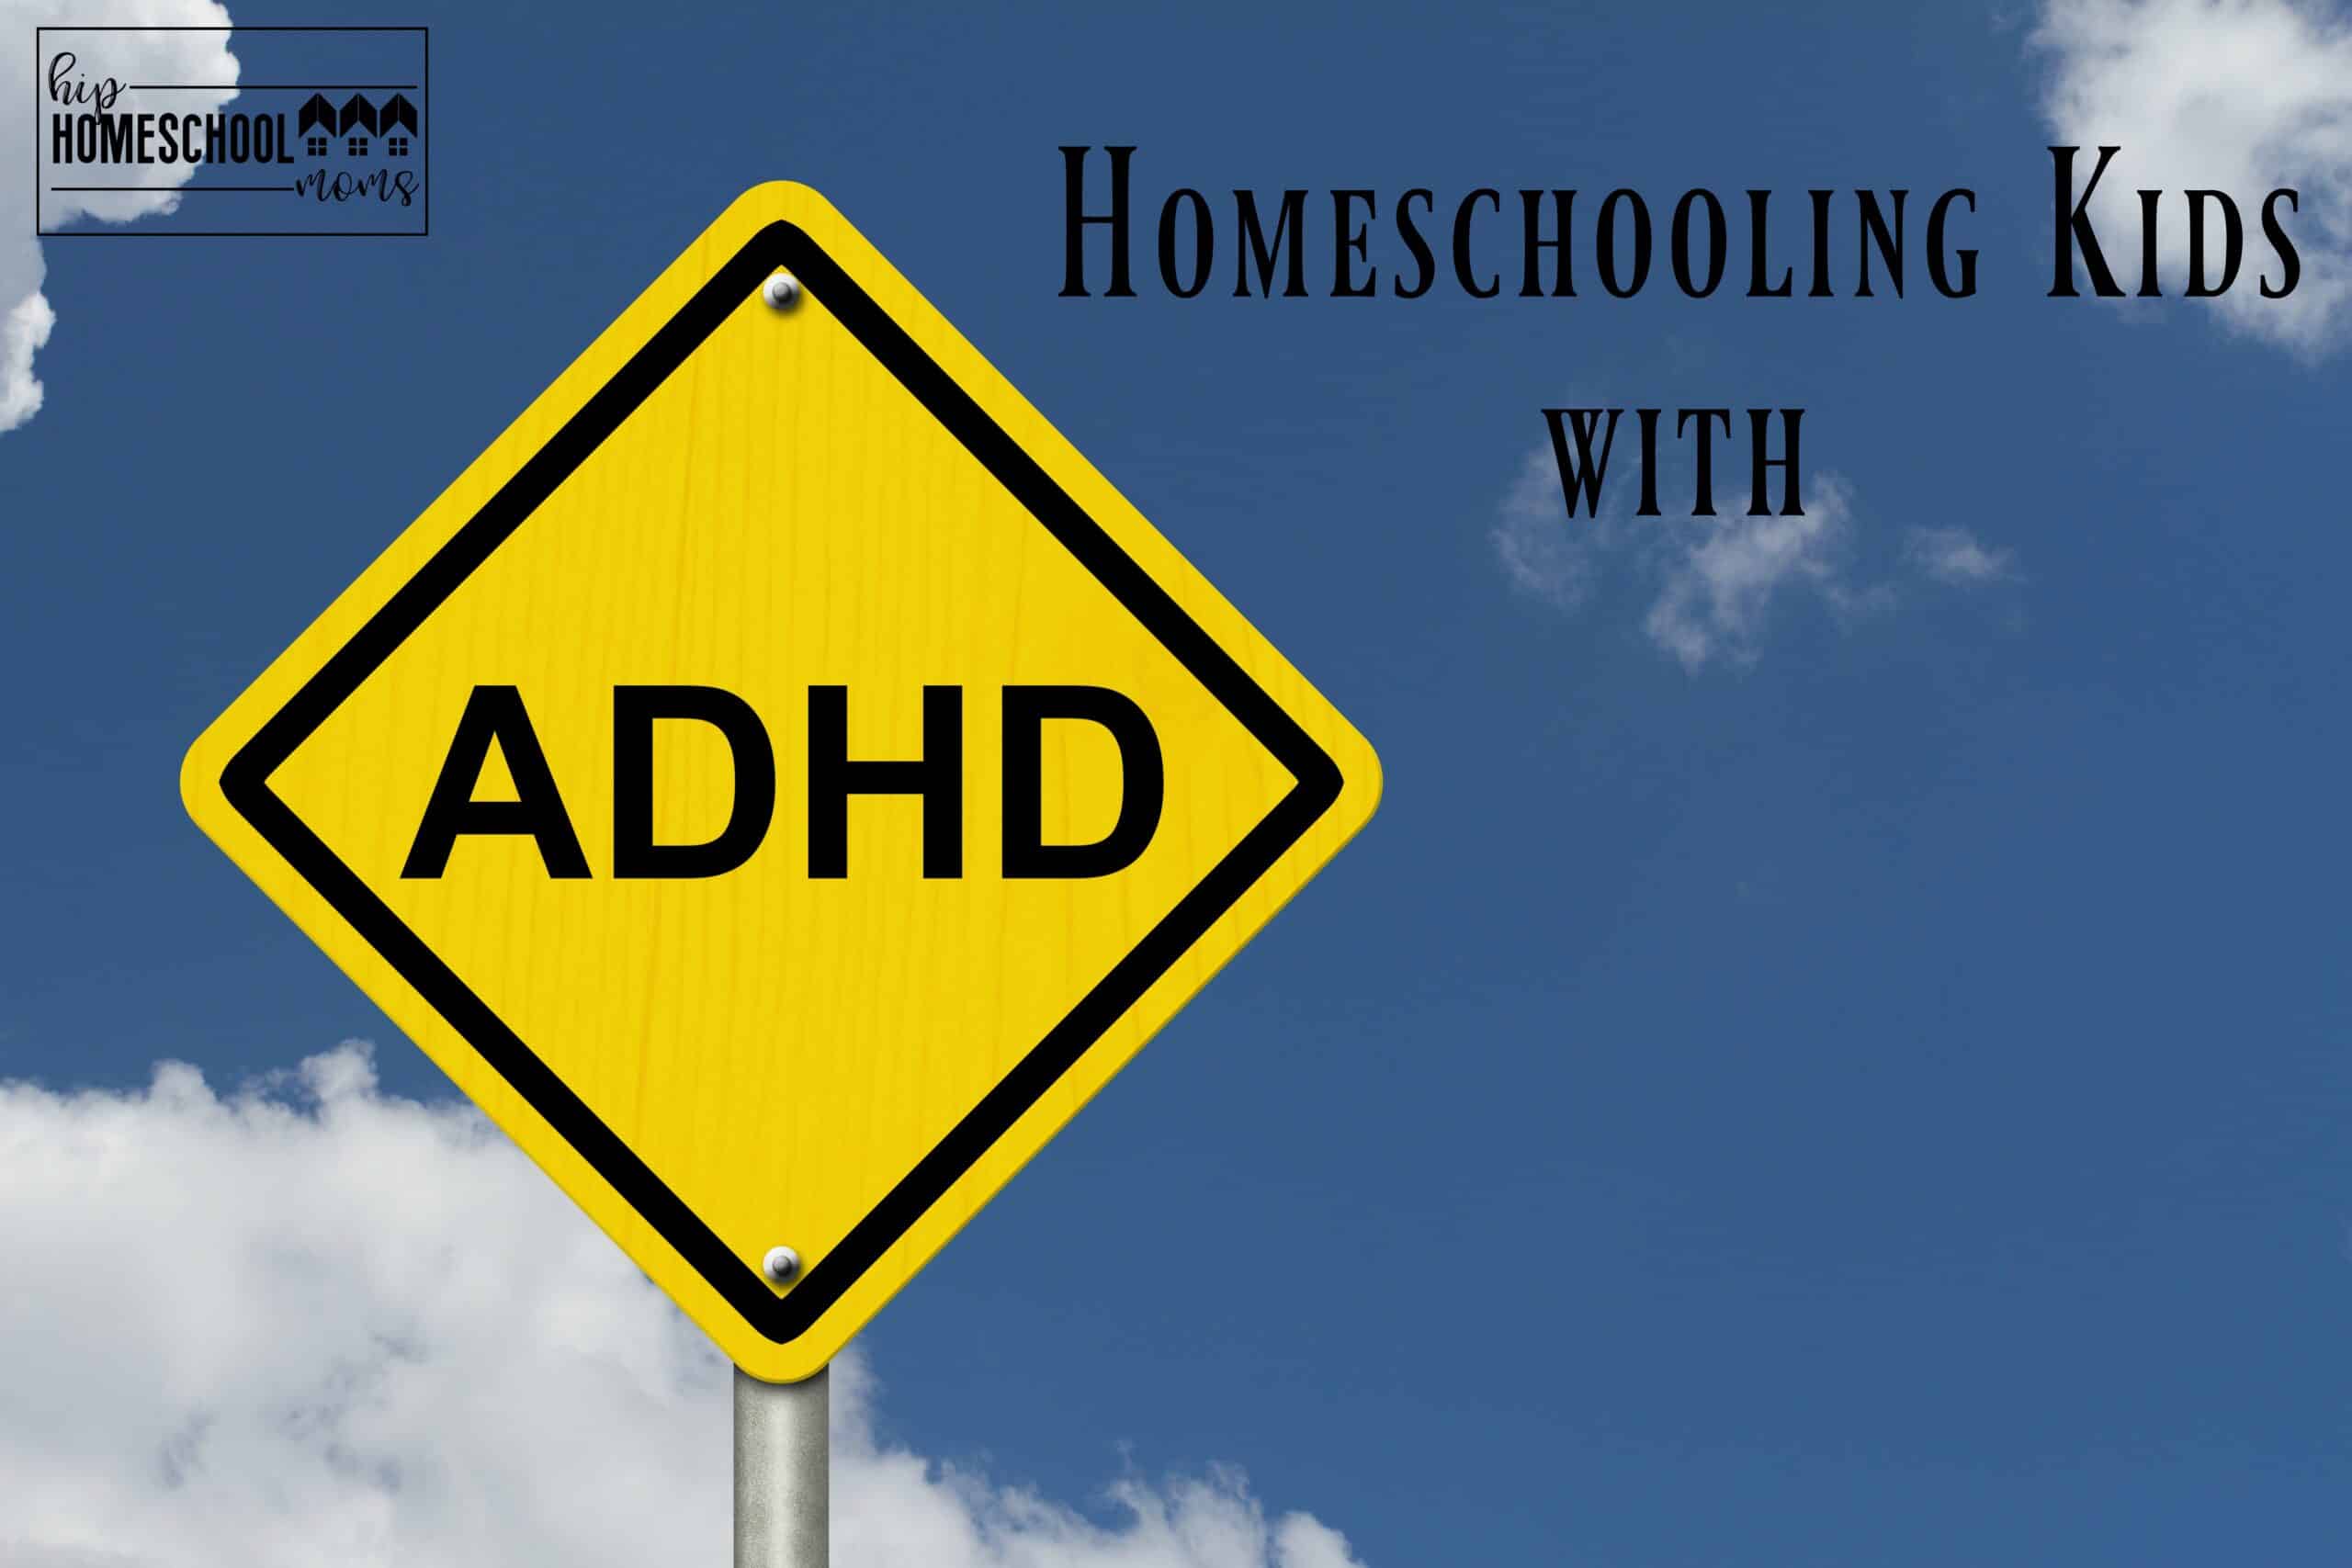 Information for parents who are considering homeschooling their children who have ADHD. 